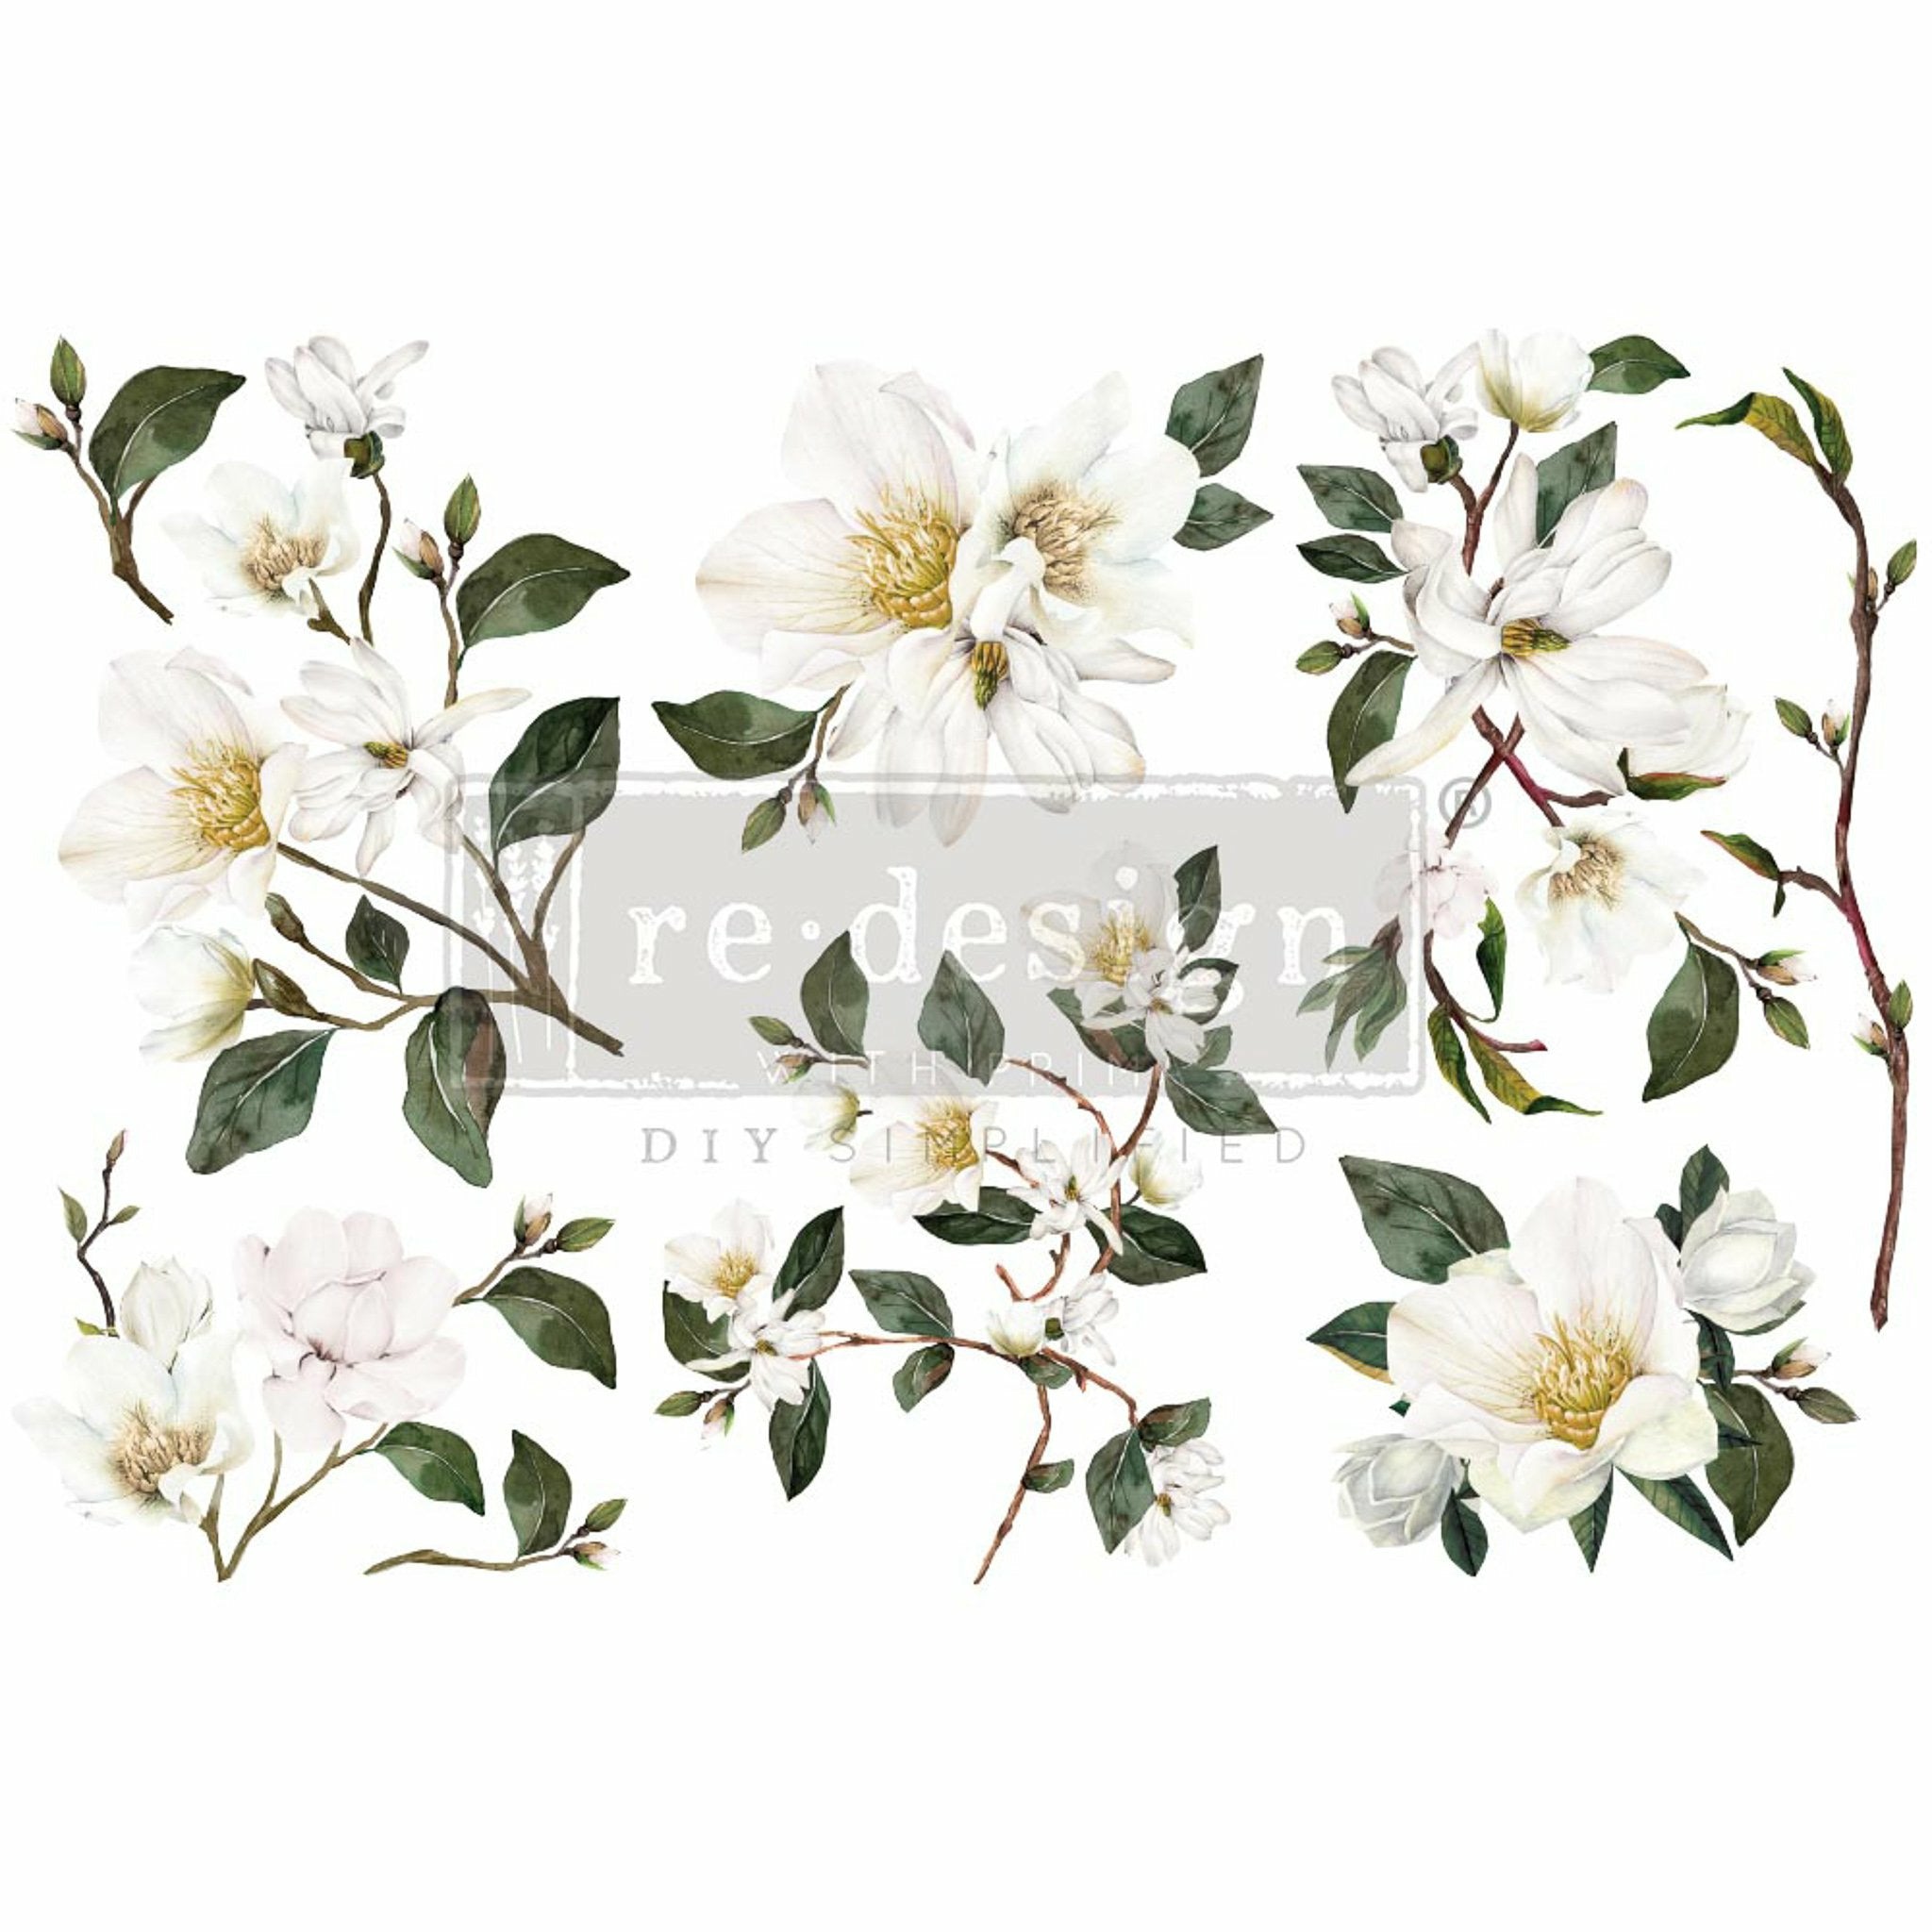 Small rub-on transfer design of white magnolia flowers on branches with green foliage. White borders are on the top and bottom.